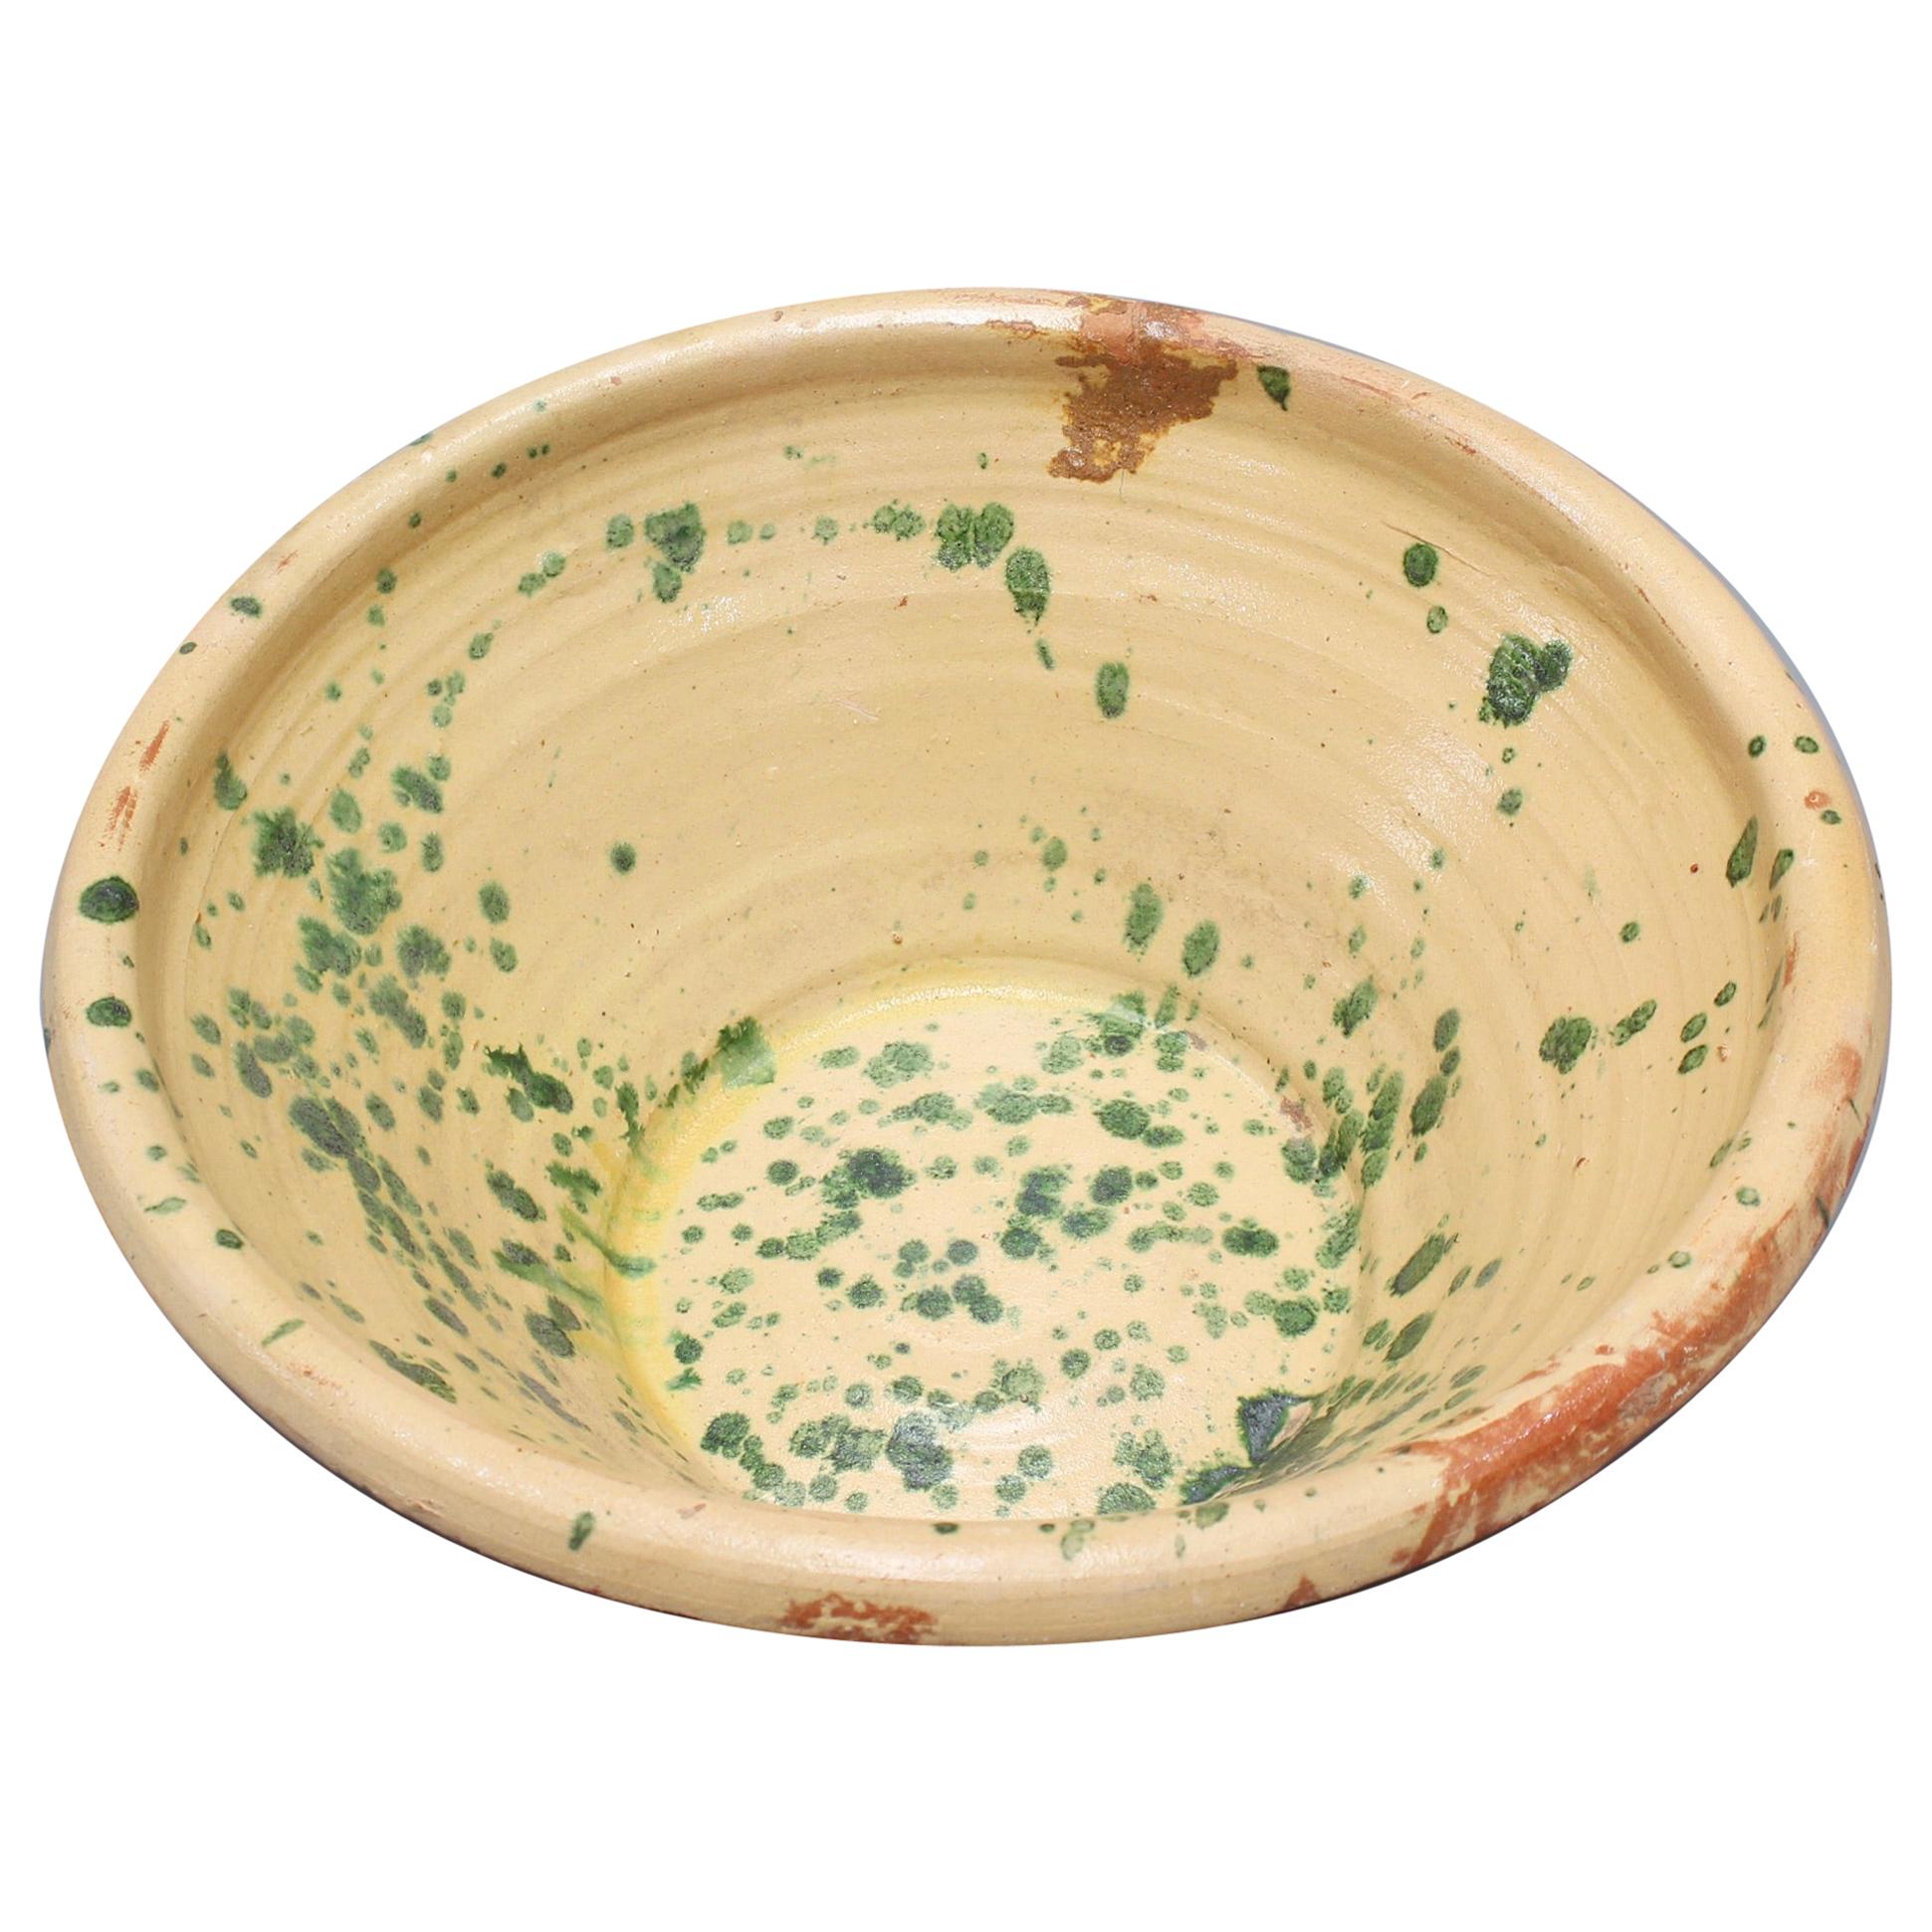 Antique Southern Italian Earthenware Passata Bowls 'Early 20th Century', Small